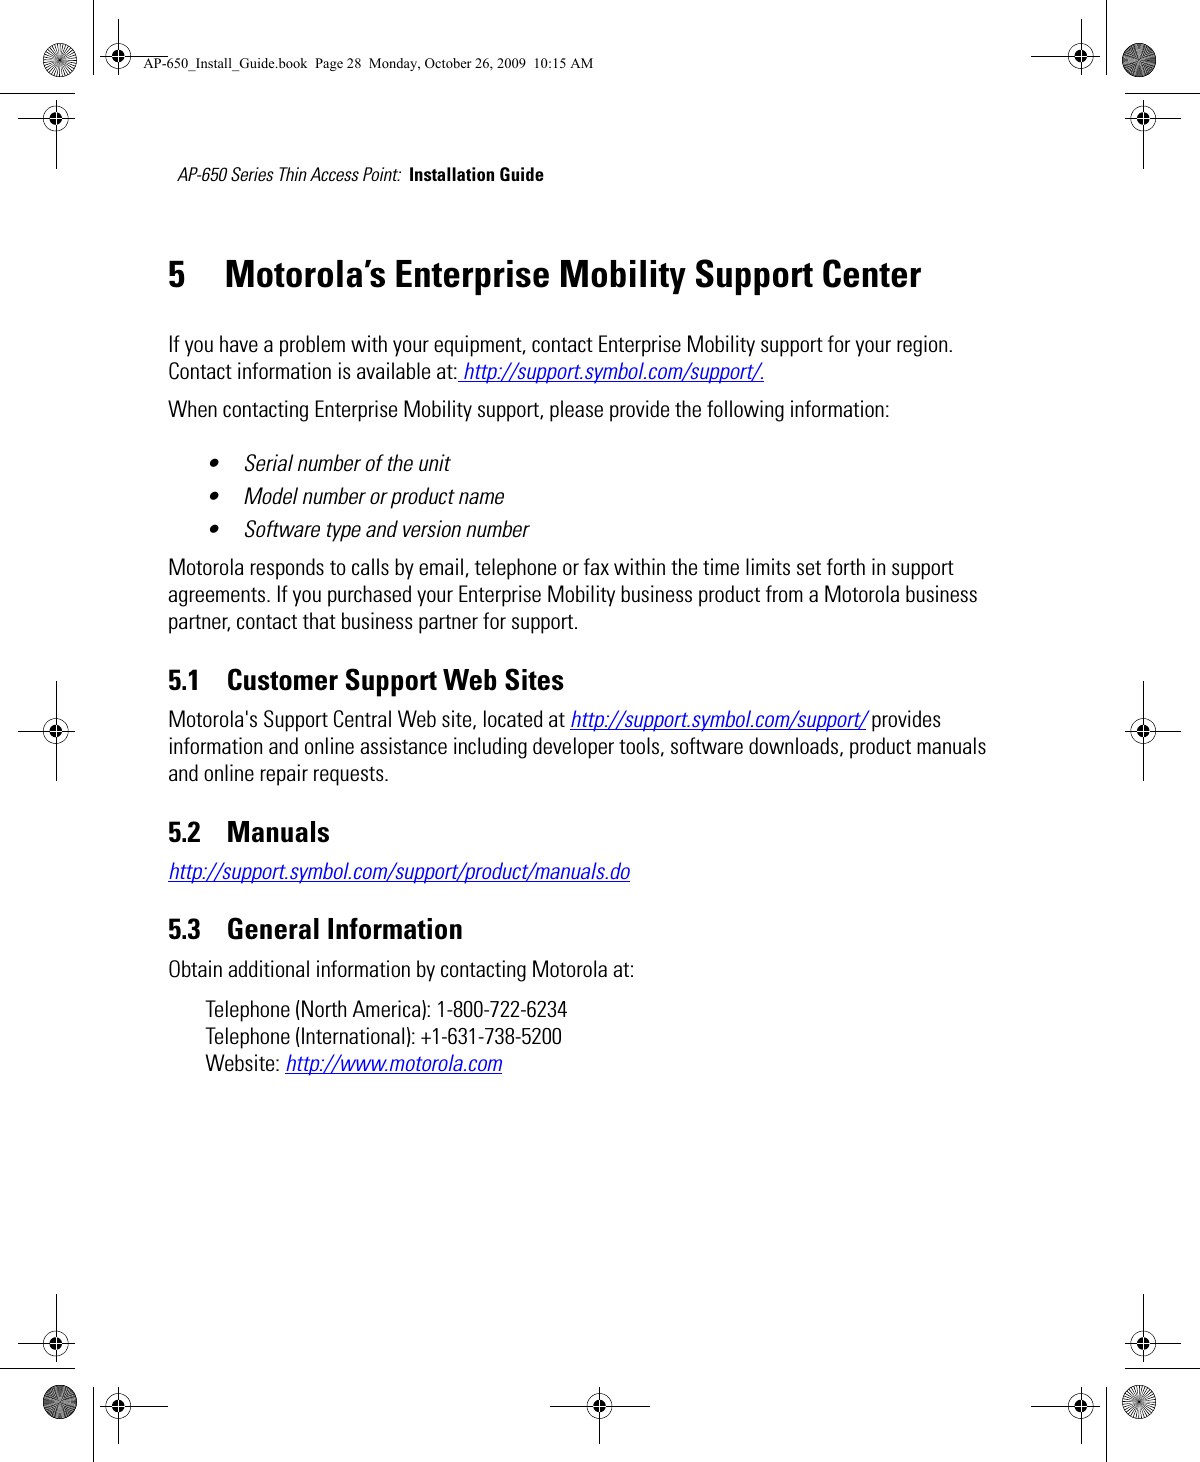 AP-650 Series Thin Access Point:  Installation Guide 5 Motorola’s Enterprise Mobility Support CenterIf you have a problem with your equipment, contact Enterprise Mobility support for your region. Contact information is available at: http://support.symbol.com/support/.When contacting Enterprise Mobility support, please provide the following information:• Serial number of the unit• Model number or product name• Software type and version numberMotorola responds to calls by email, telephone or fax within the time limits set forth in support agreements. If you purchased your Enterprise Mobility business product from a Motorola business partner, contact that business partner for support.5.1    Customer Support Web SitesMotorola&apos;s Support Central Web site, located at http://support.symbol.com/support/ provides information and online assistance including developer tools, software downloads, product manuals and online repair requests.5.2    Manualshttp://support.symbol.com/support/product/manuals.do5.3    General InformationObtain additional information by contacting Motorola at:Telephone (North America): 1-800-722-6234 Telephone (International): +1-631-738-5200Website: http://www.motorola.comAP-650_Install_Guide.book  Page 28  Monday, October 26, 2009  10:15 AM